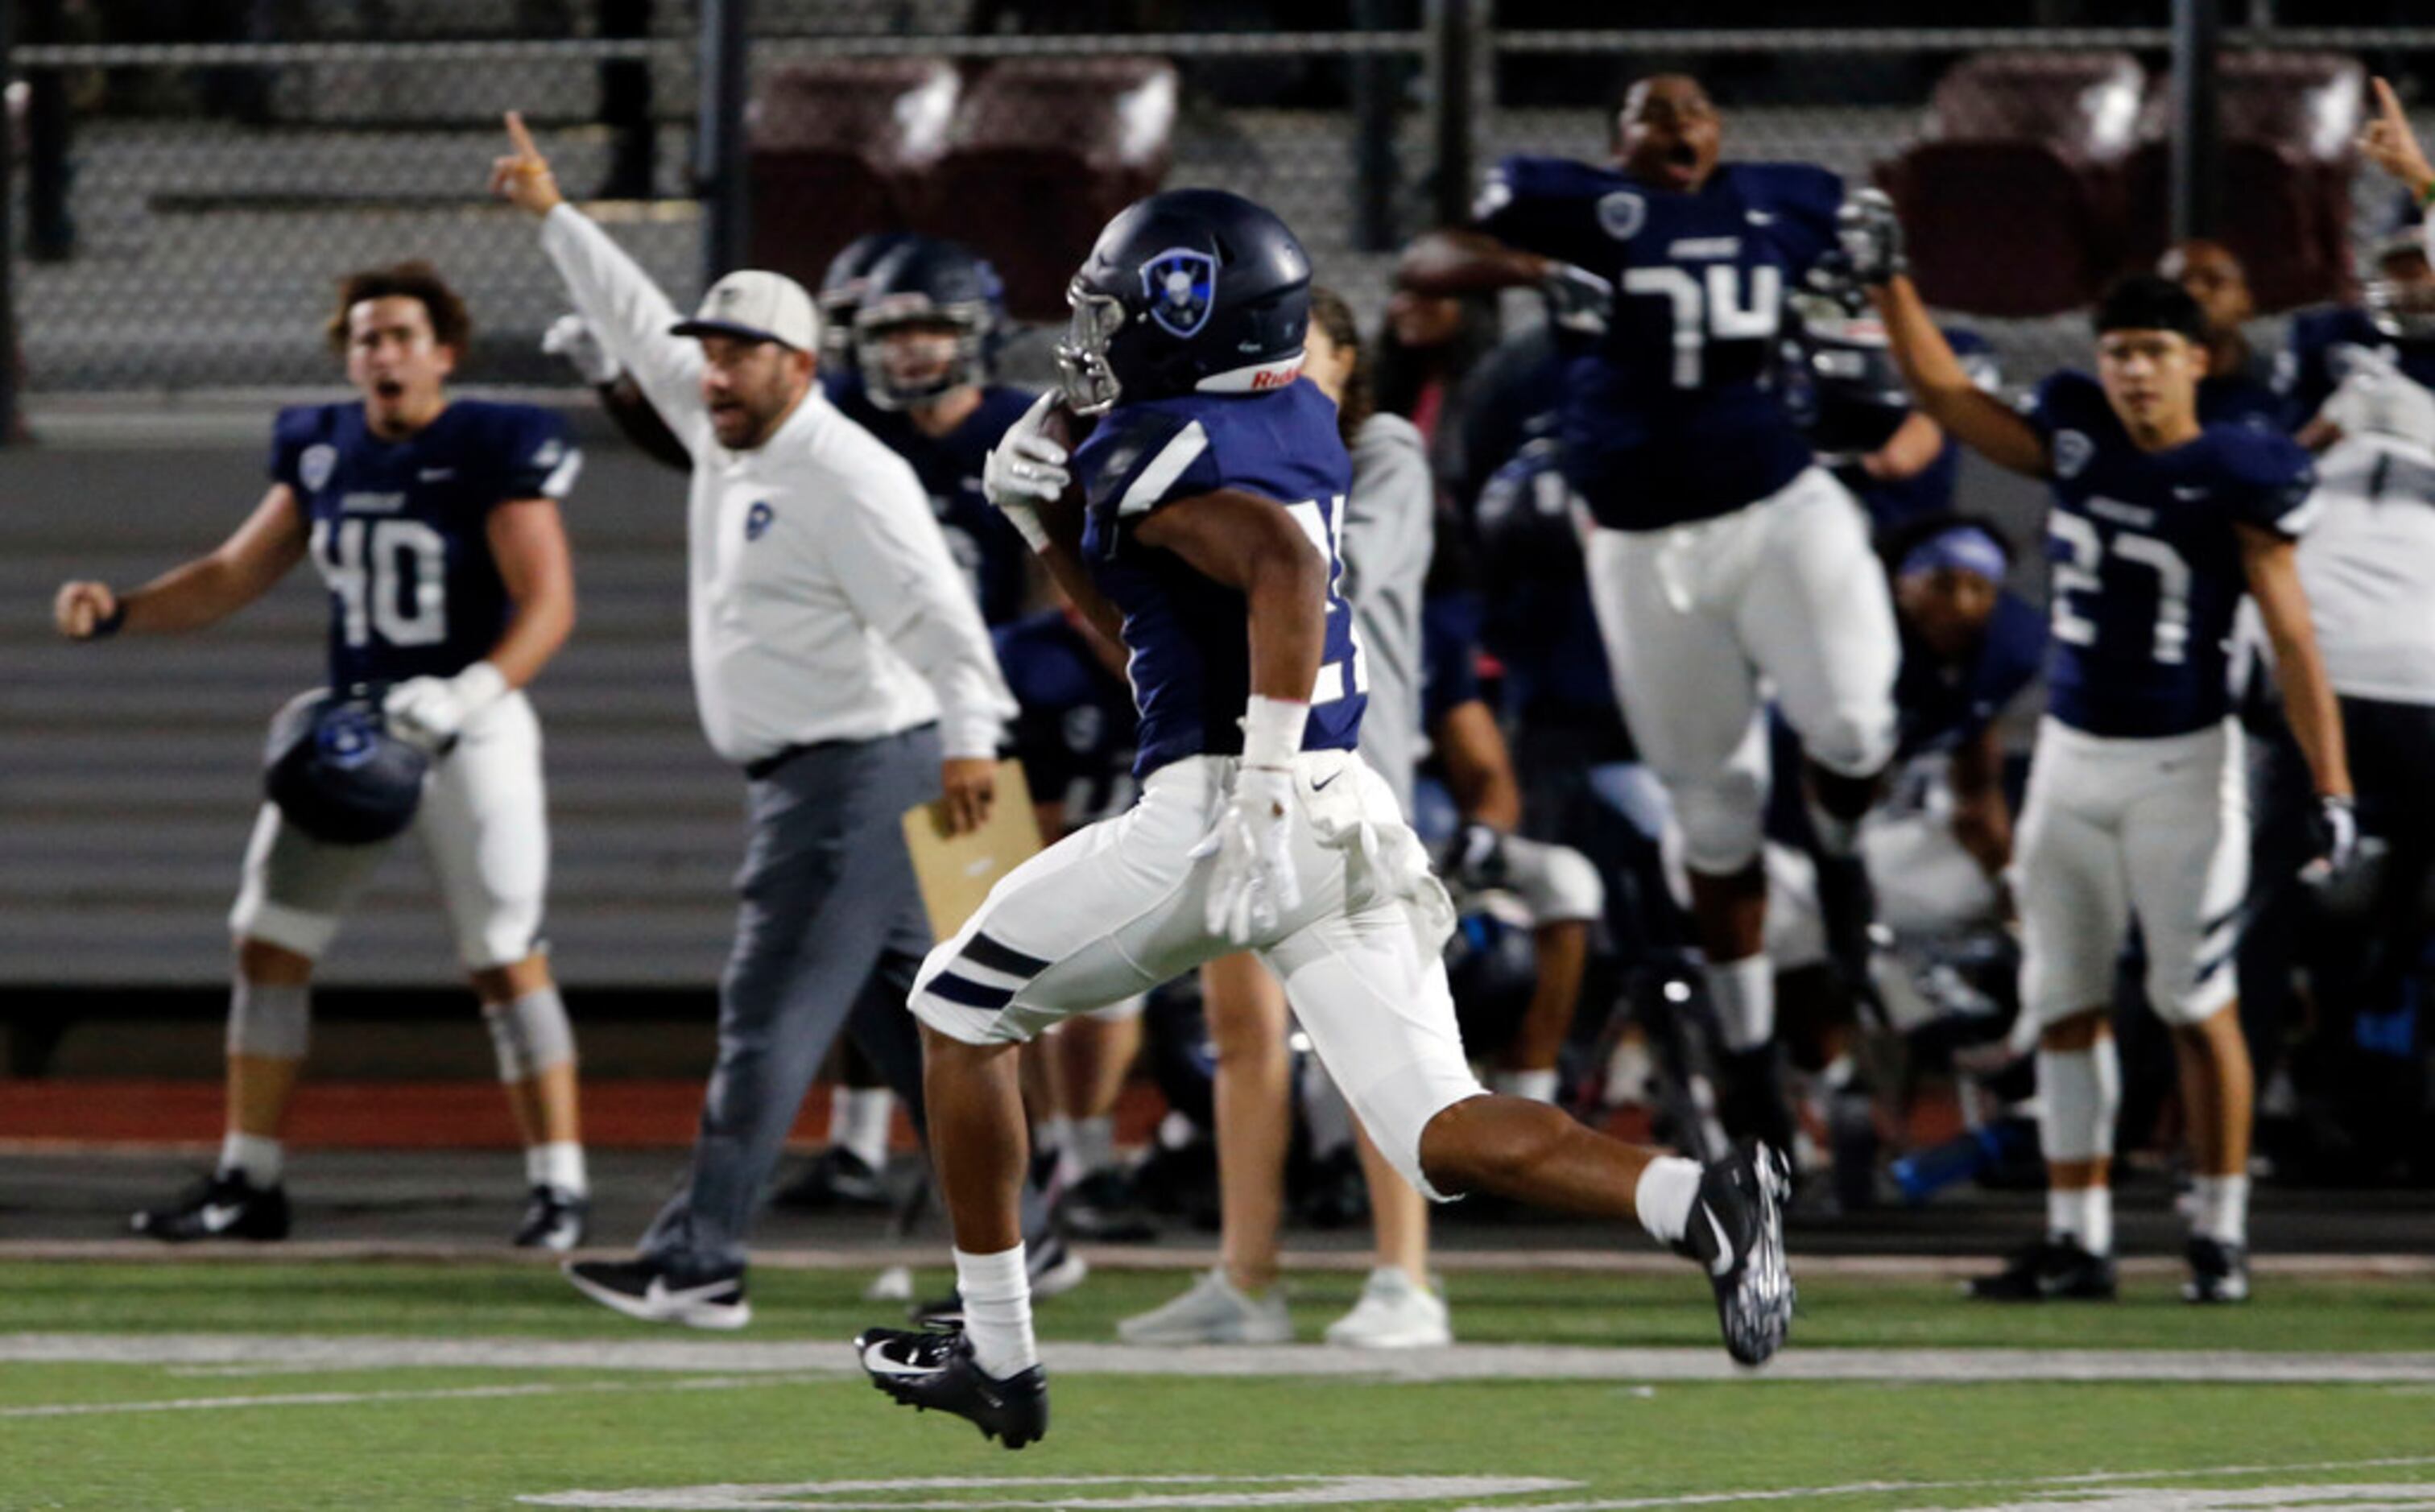 The Wylie East Bench erupts, as TJ Washington (21) takes his reception to the end zone for a...